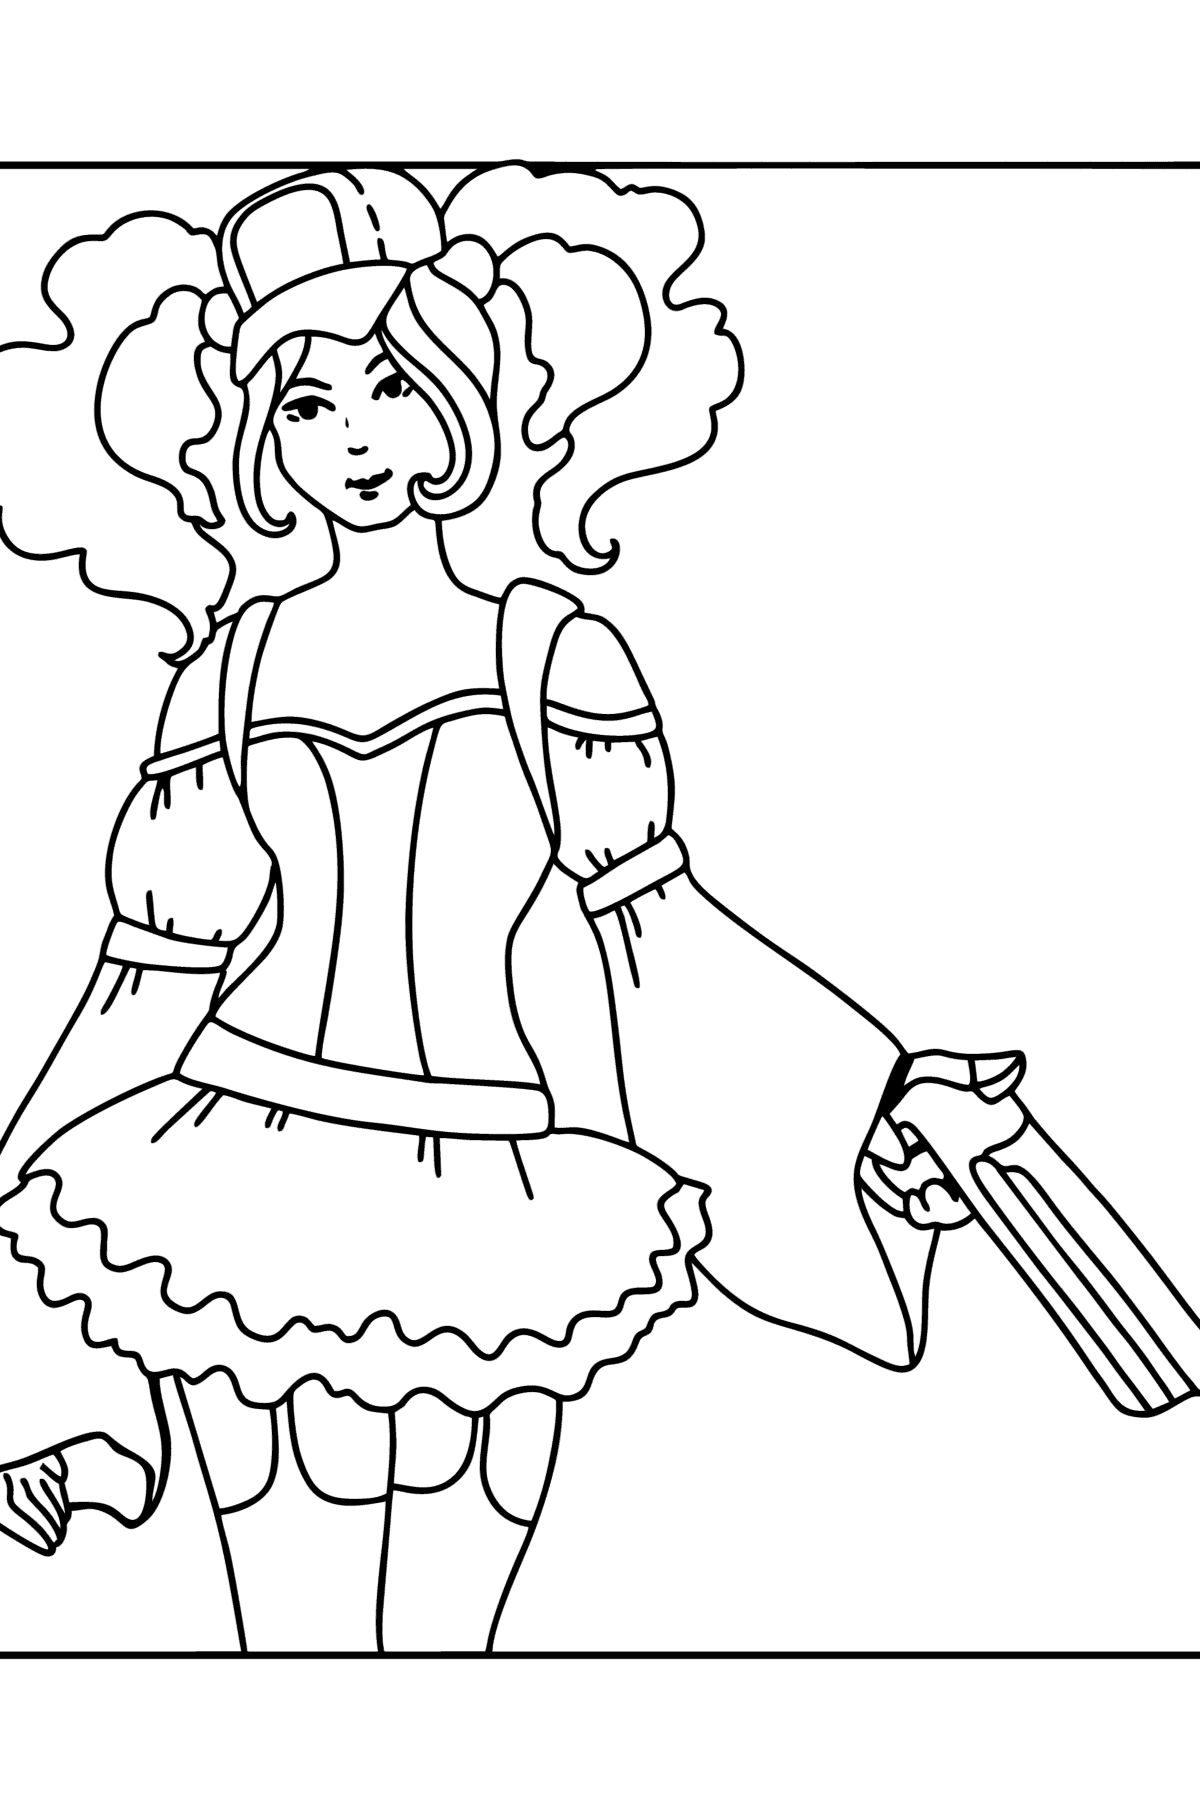 Fortnite Zoey coloring page - Coloring Pages for Kids